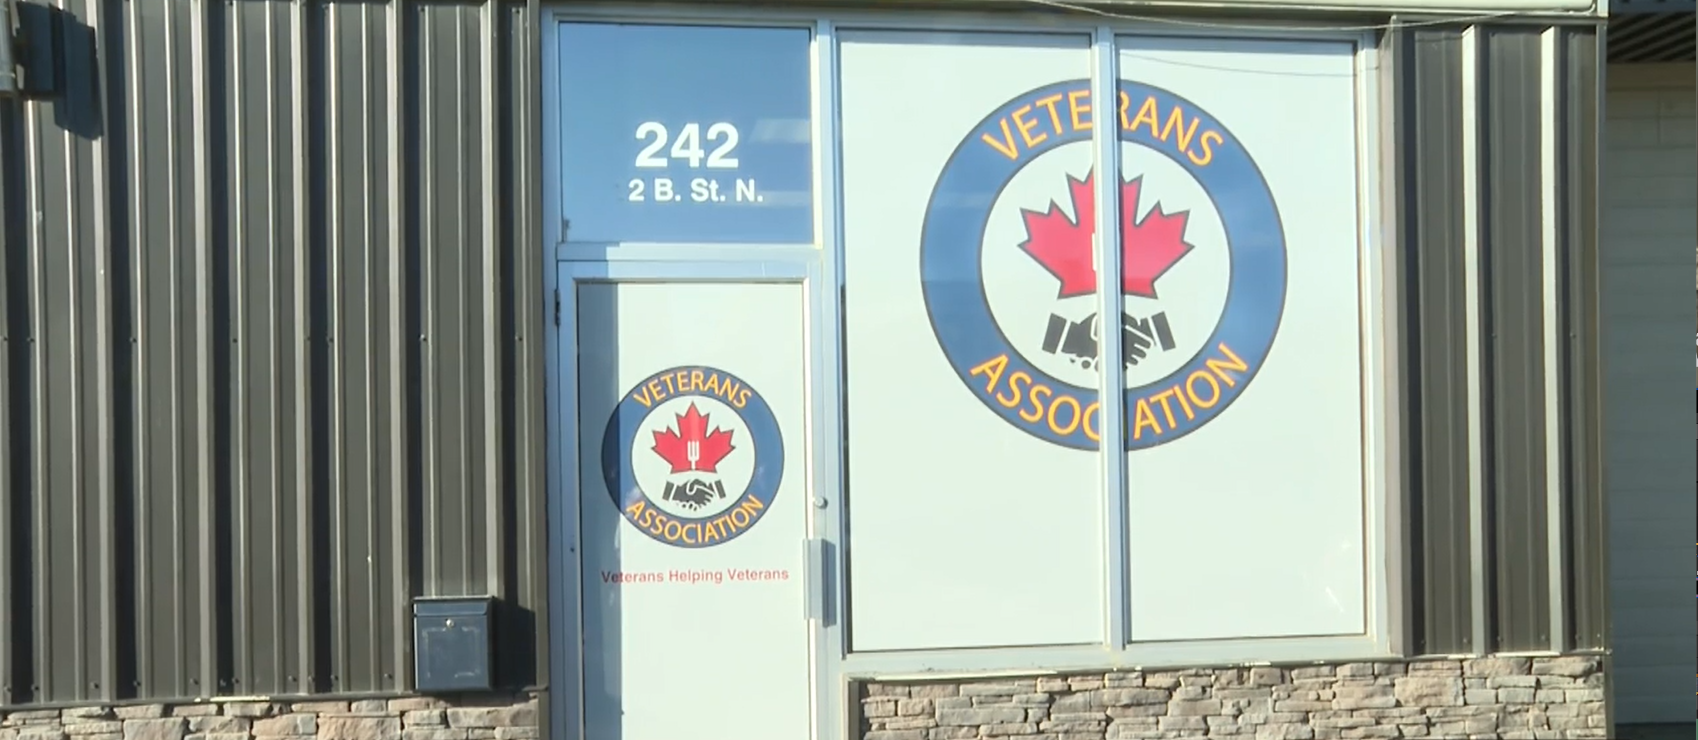 New Veterans Association Food Bank centre to open in Lethbridge